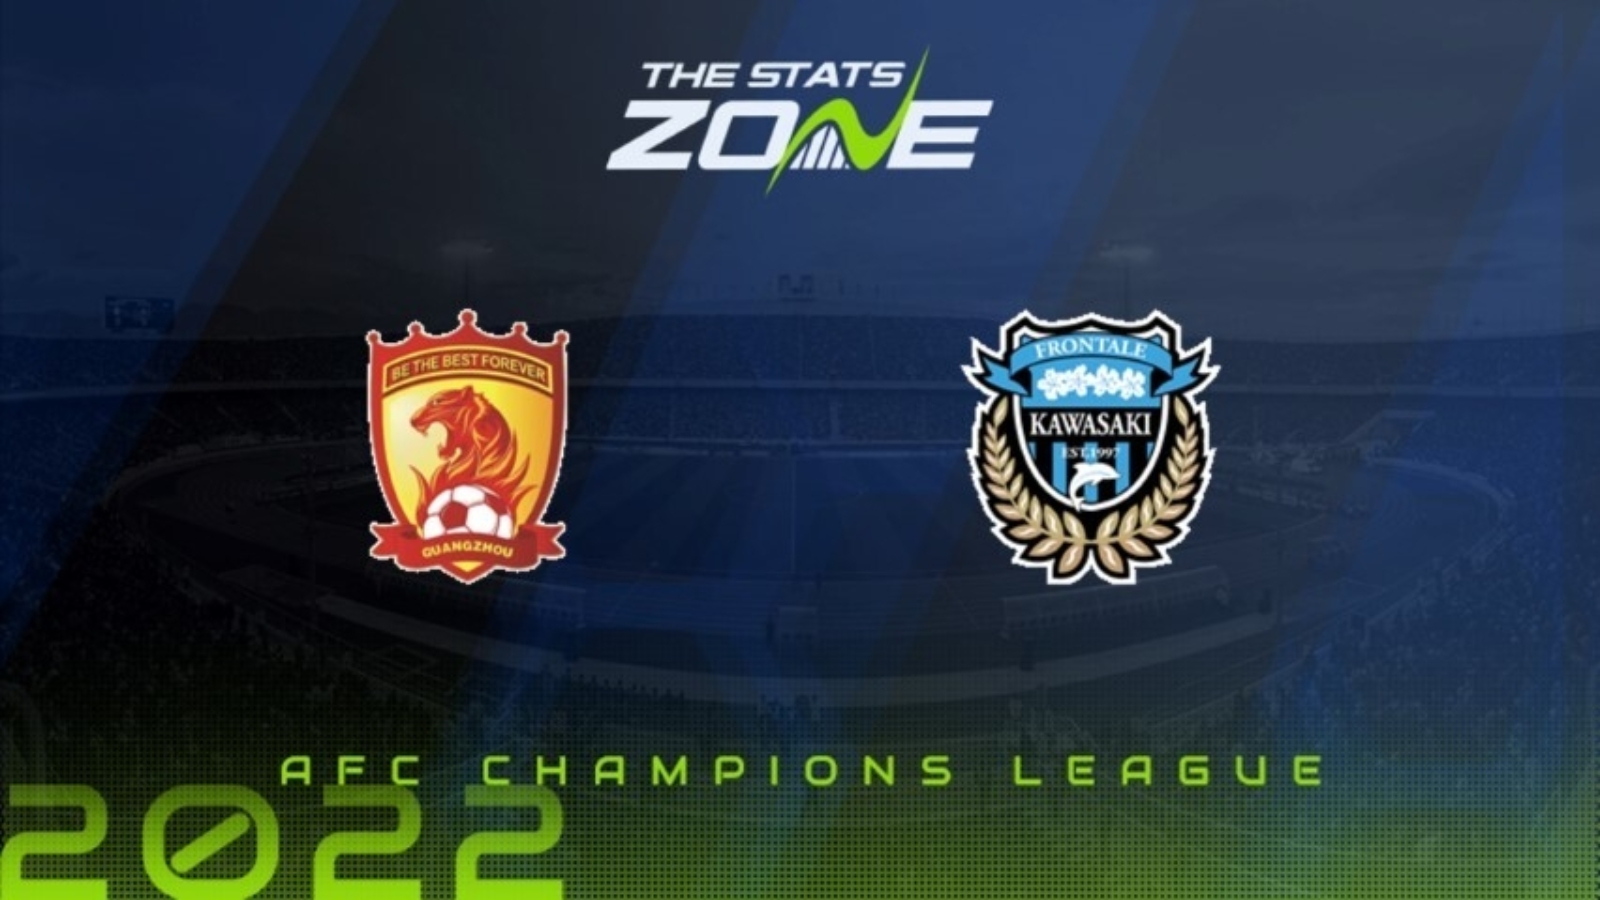 Guangzhou Fc Vs Kawasaki Frontale Group Stage Preview Prediction 22 Afc Champions League The Stats Zone